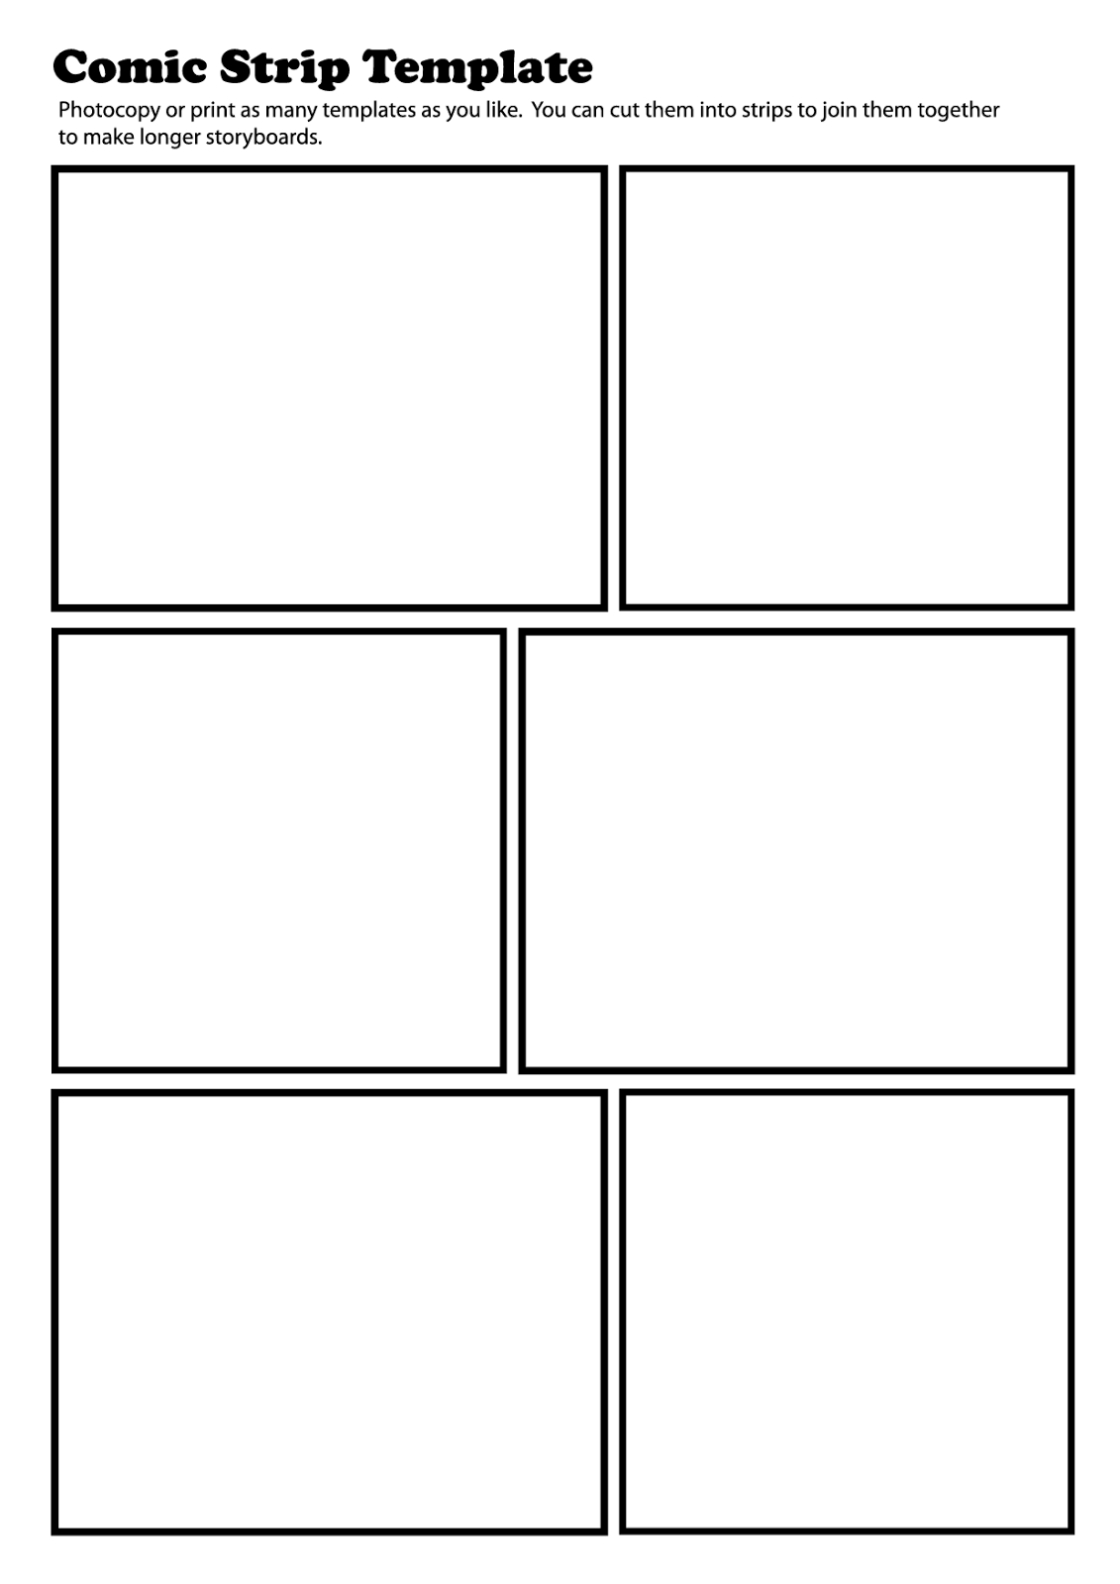 Alma Boheme: Create-A-Story As A Family - Creative Writing Challenge with regard to Printable Blank Comic Strip Template For Kids